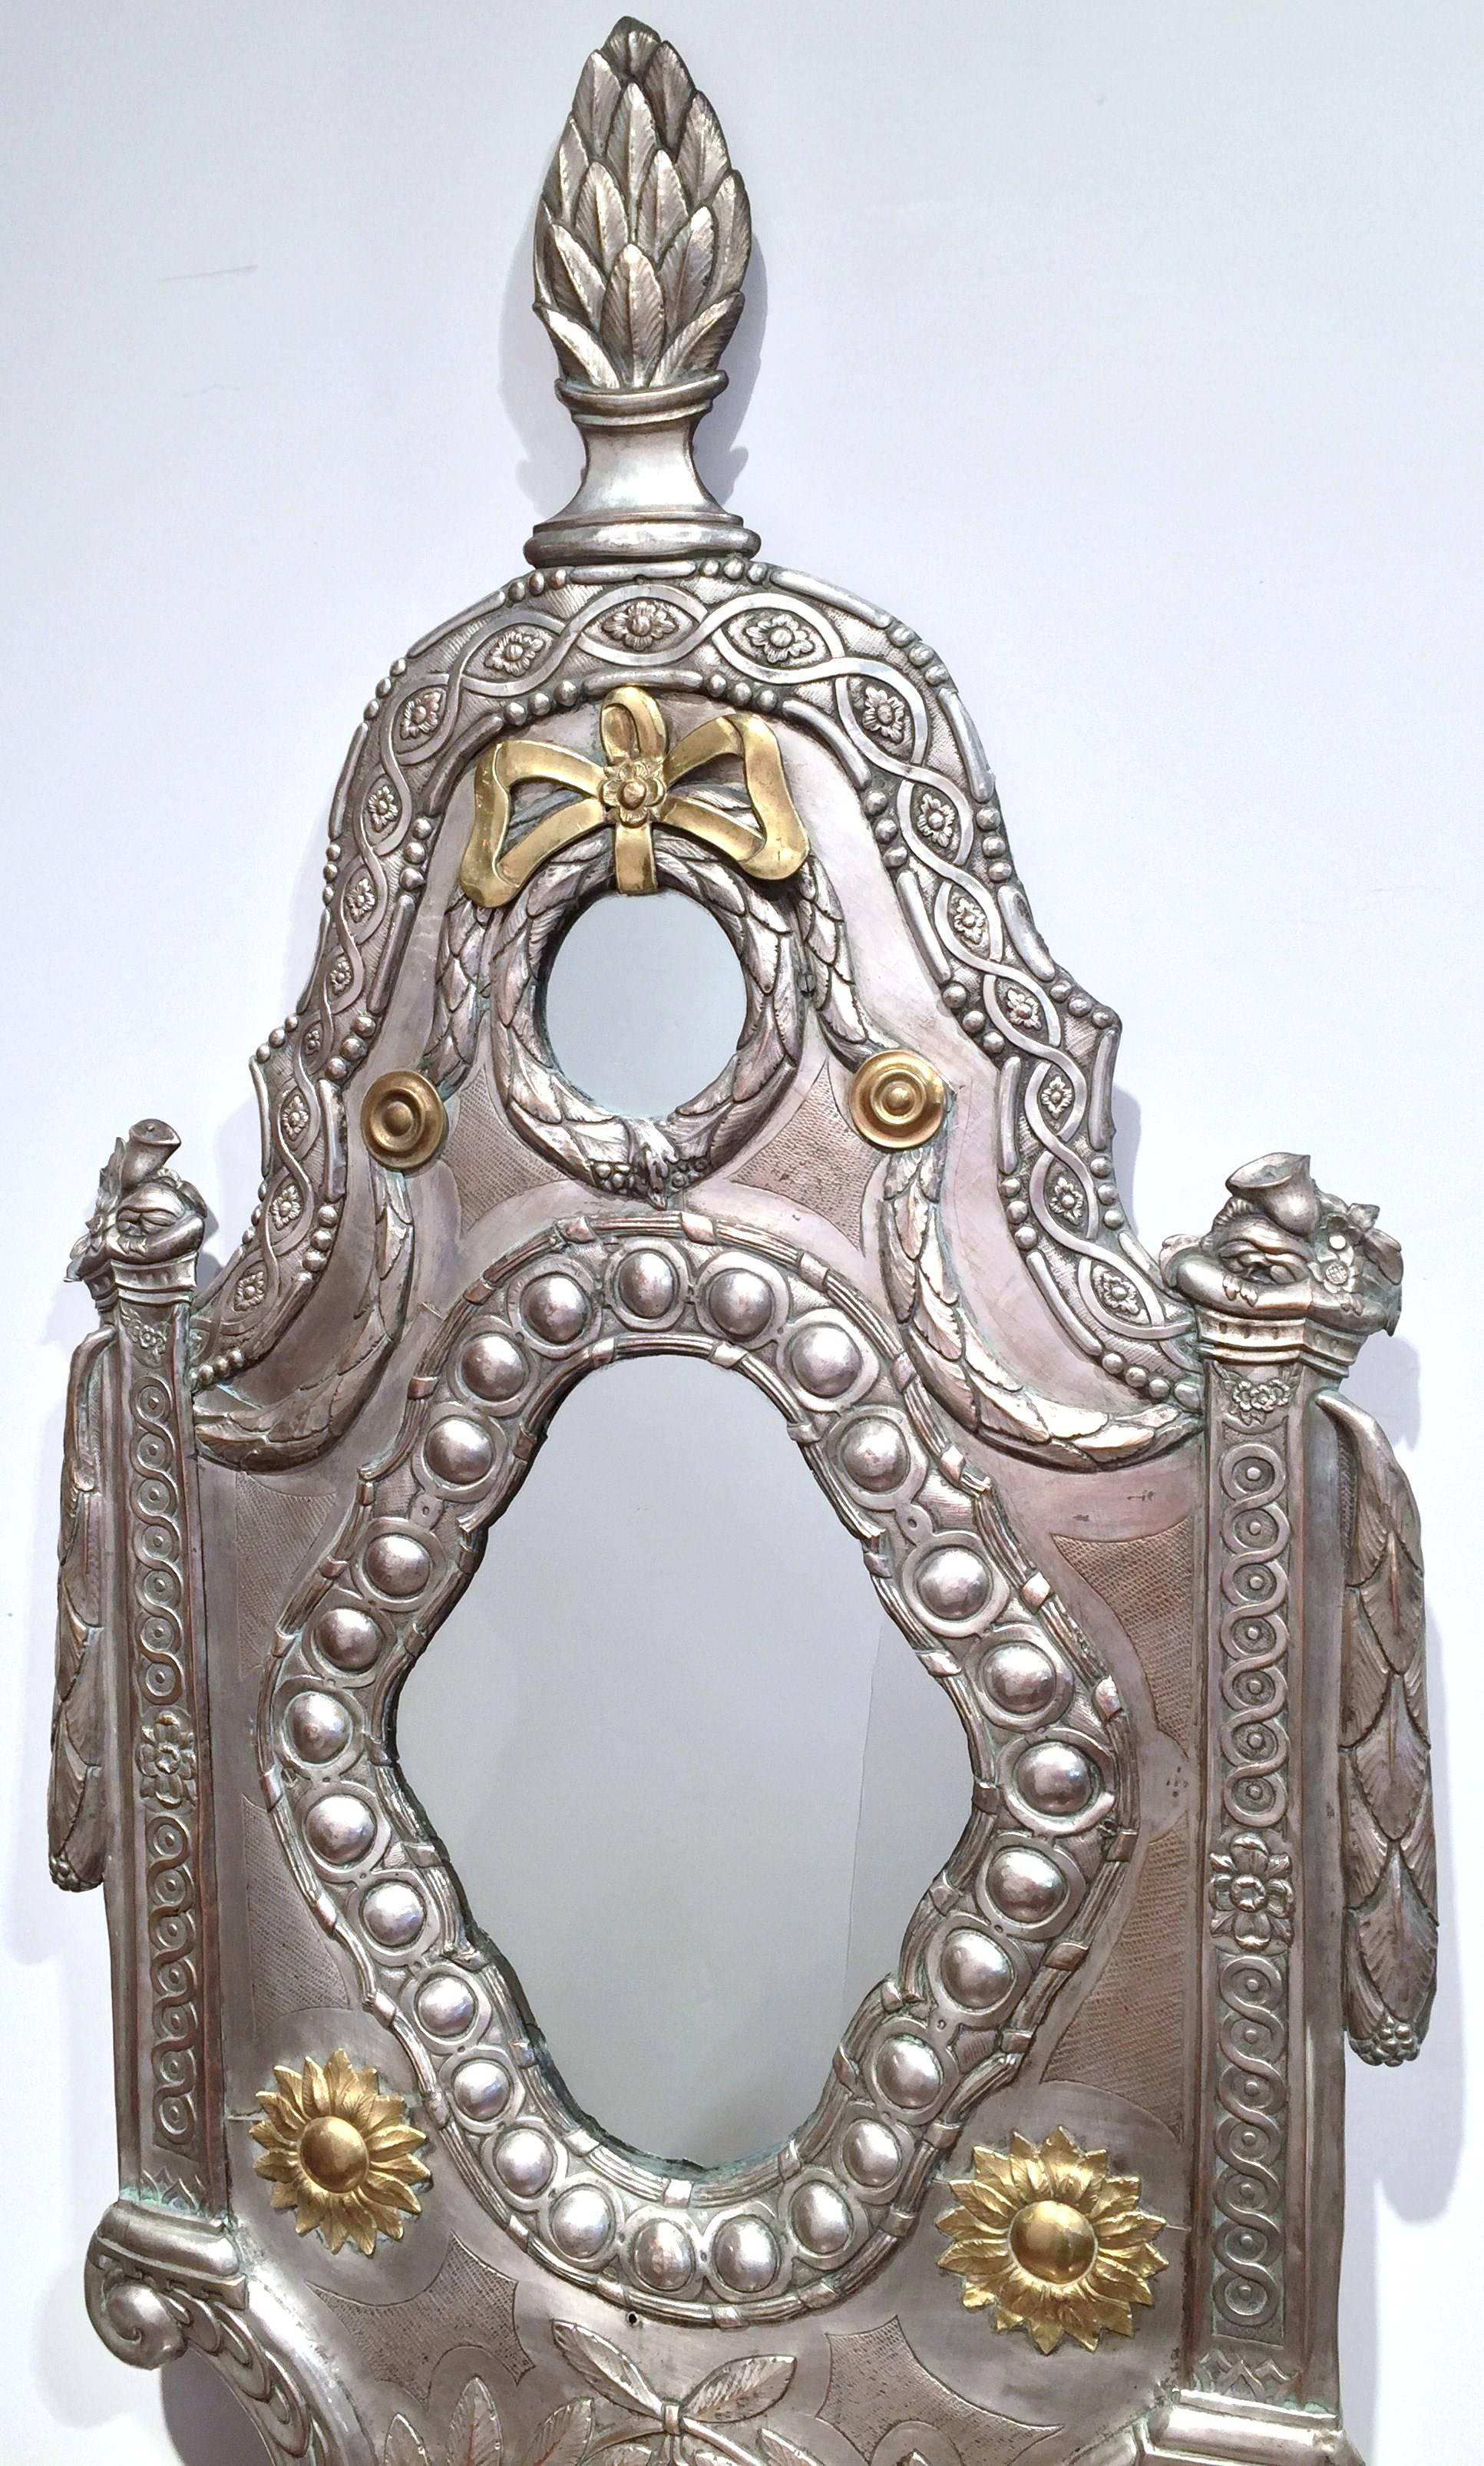 This unusual antique copper and silver plated mirror was crafted in France, circa 1840. The overlay wall hanging piece features some repousse decor, including large cones on top and bottom, three shaped mirrors, draped swags on both sides, and the